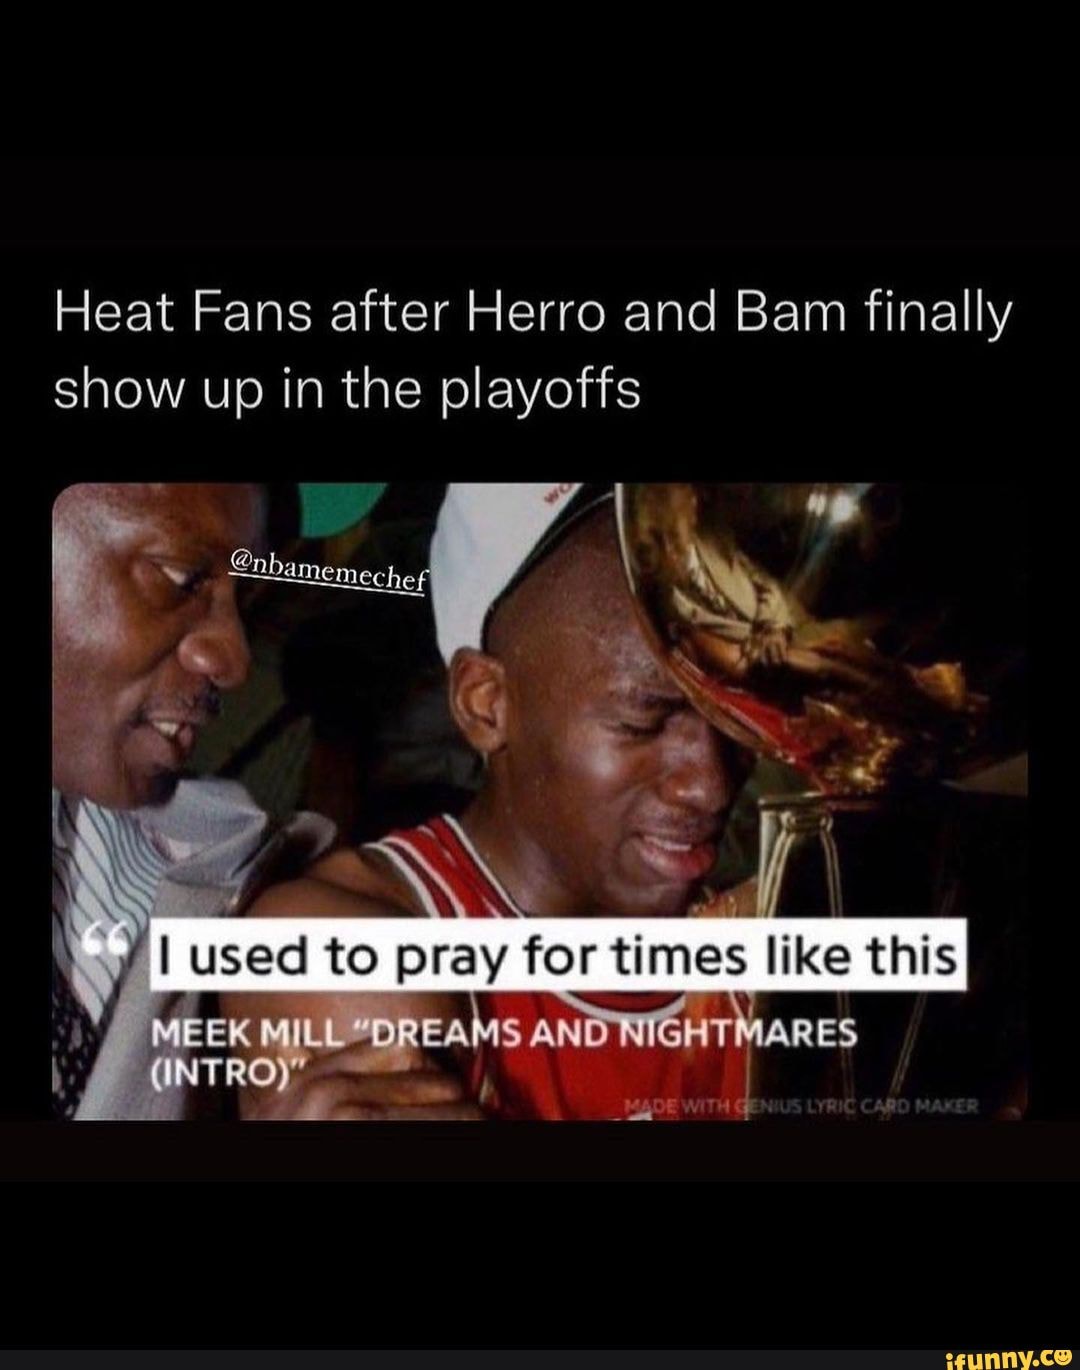 Heat Fans after Herro and Bam finally show up in the playoffs